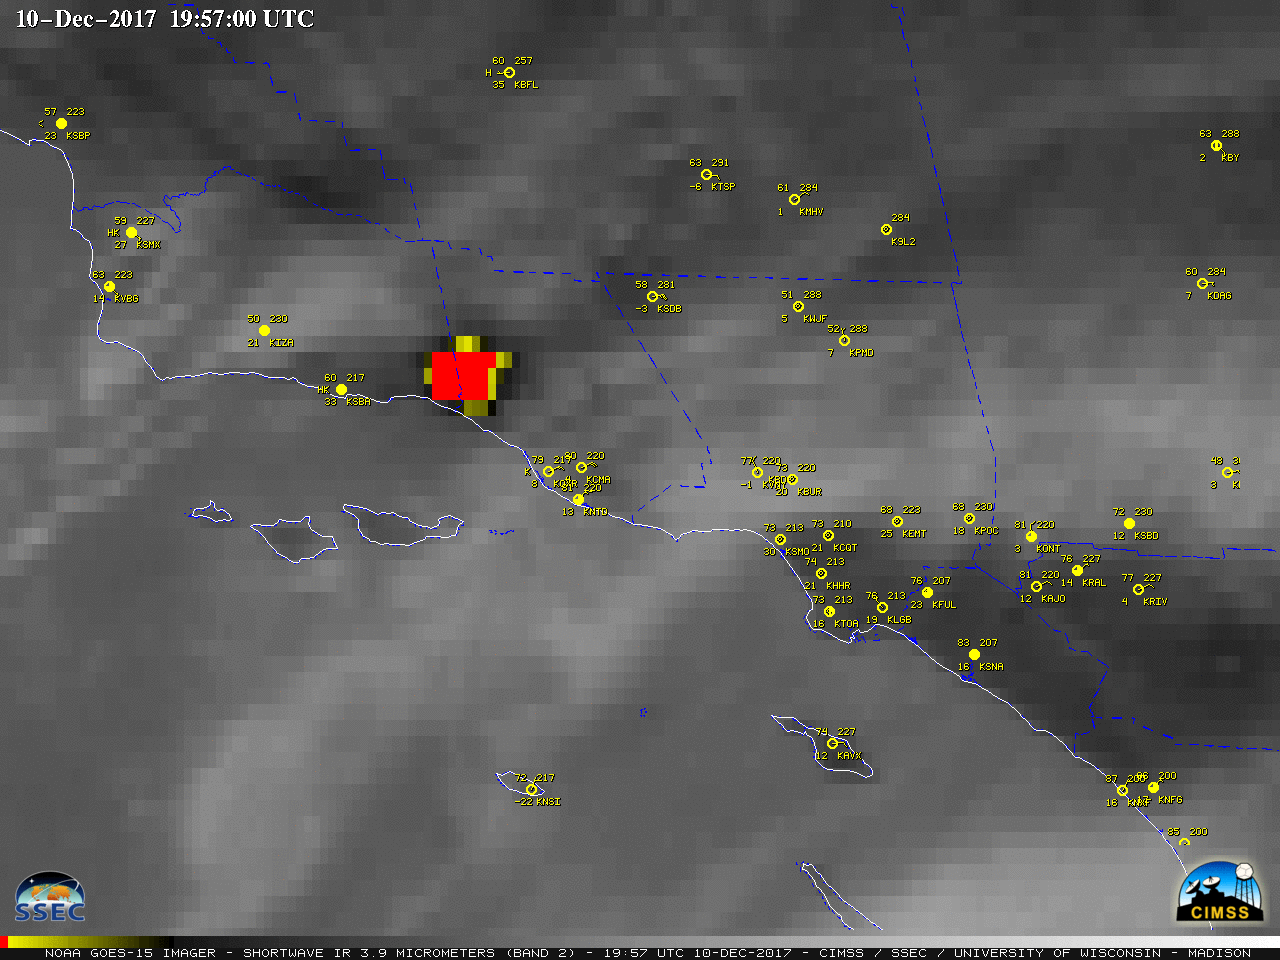 GOES-15 Shortwave Infrared (3.9 µm) images, with hourly surface reports plotted in yellow [click to play MP4 animation]